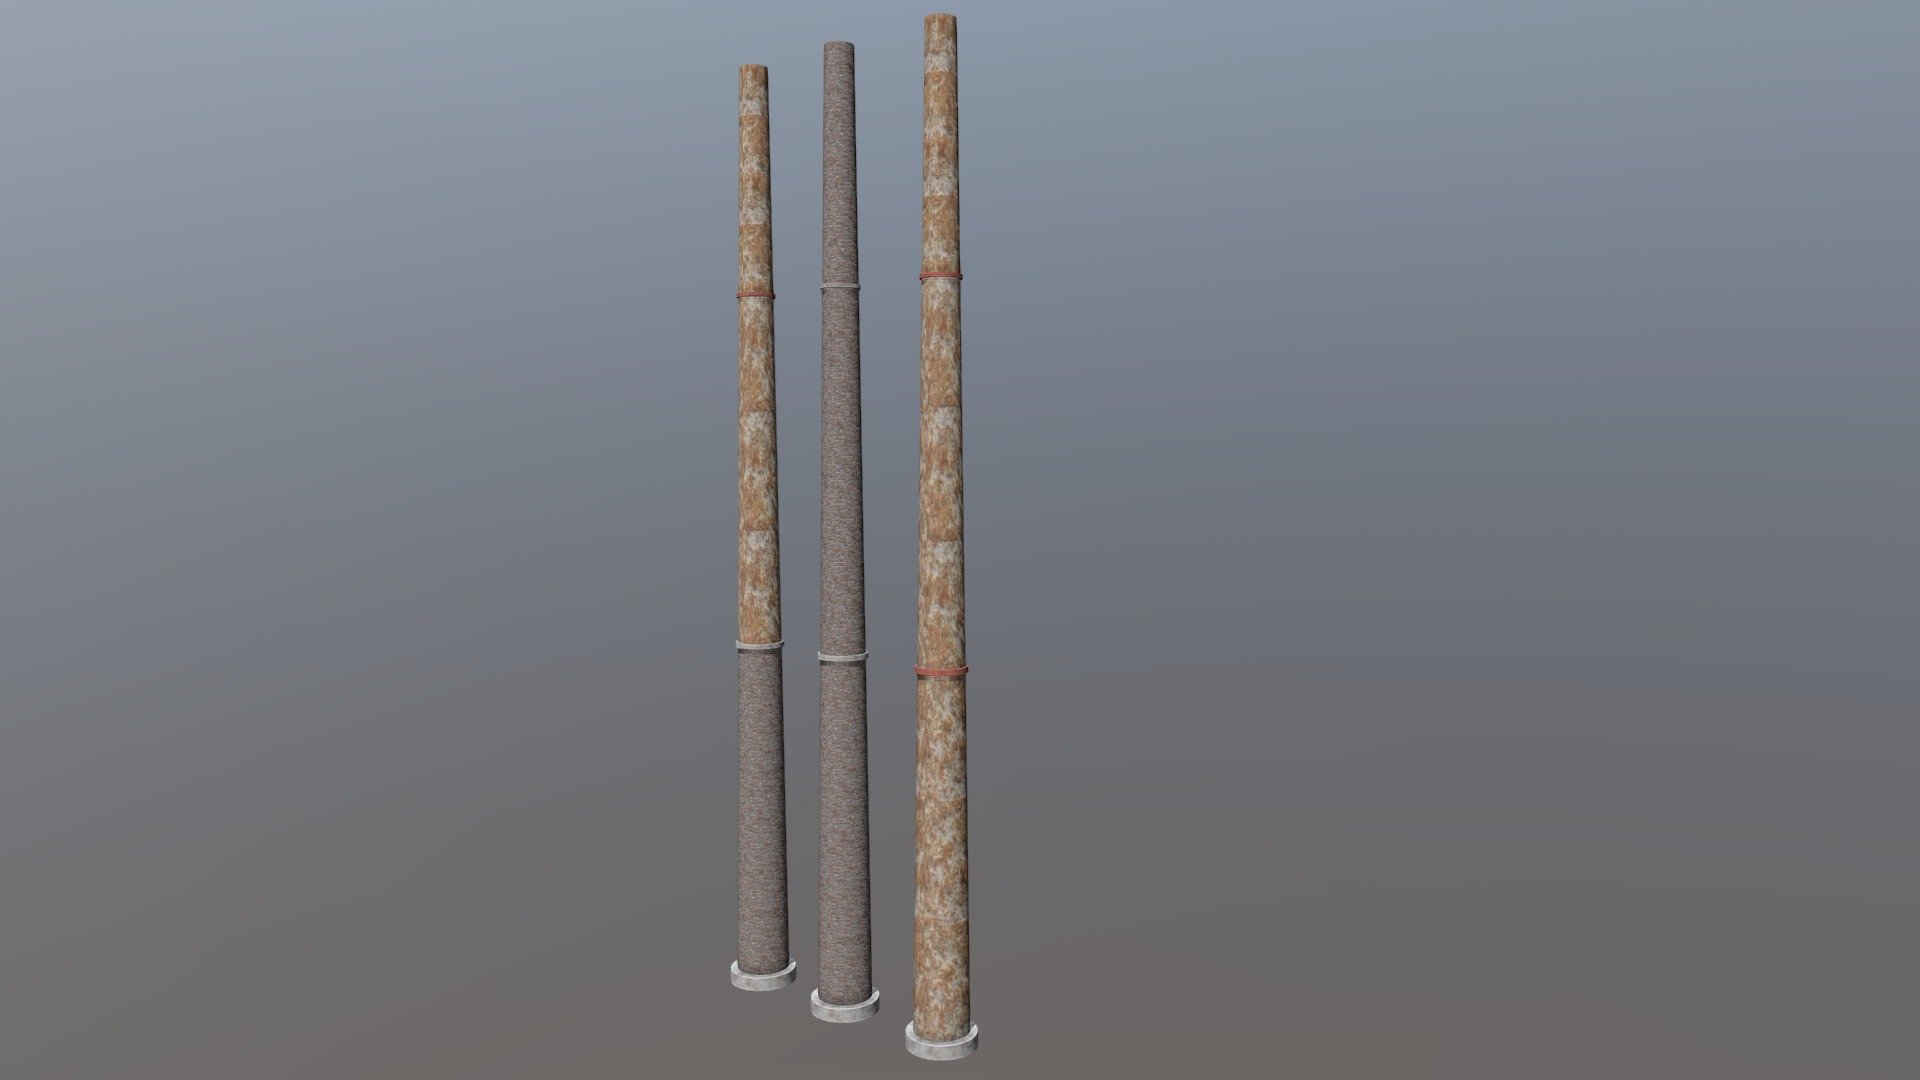 A set of low-poly smoke stacks that will be used for an upcoming project - Shinrin Yoku. The smoke stacks are seperated into 3 individual objects so you can pick the style you like the most and use only that one. They also all use the same 4k texture file to help with batching in your game engine and to make the textures look good when up close. Feel free to use them however you wish, just don't claim them as yours. 

Credit is not required, but is appreciated.

Follow me on Facebook, Instagram, or SketchFab to support me and keep up with future game releases 3d model